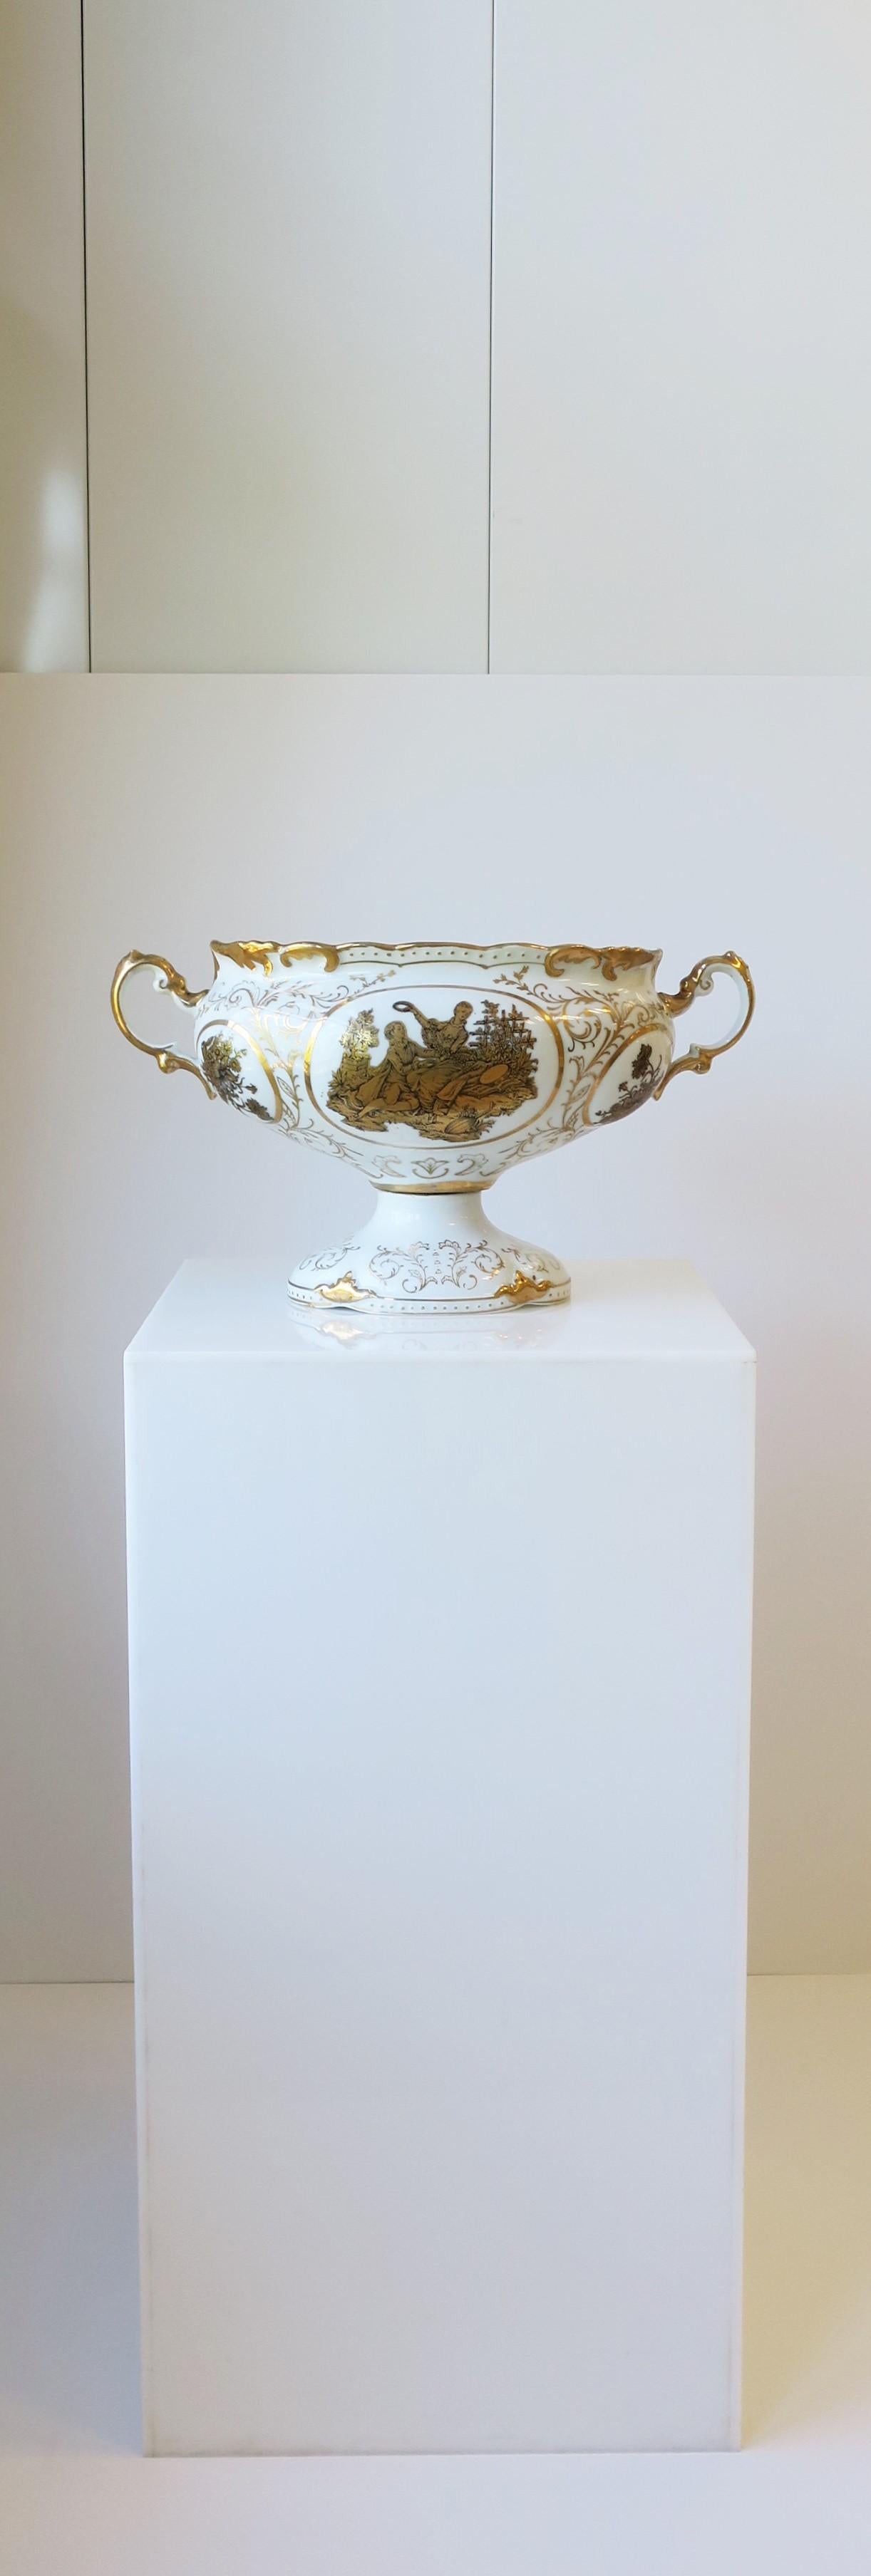 Italian Porcelain Urn or Jardinière Neoclassical Design  In Good Condition For Sale In New York, NY